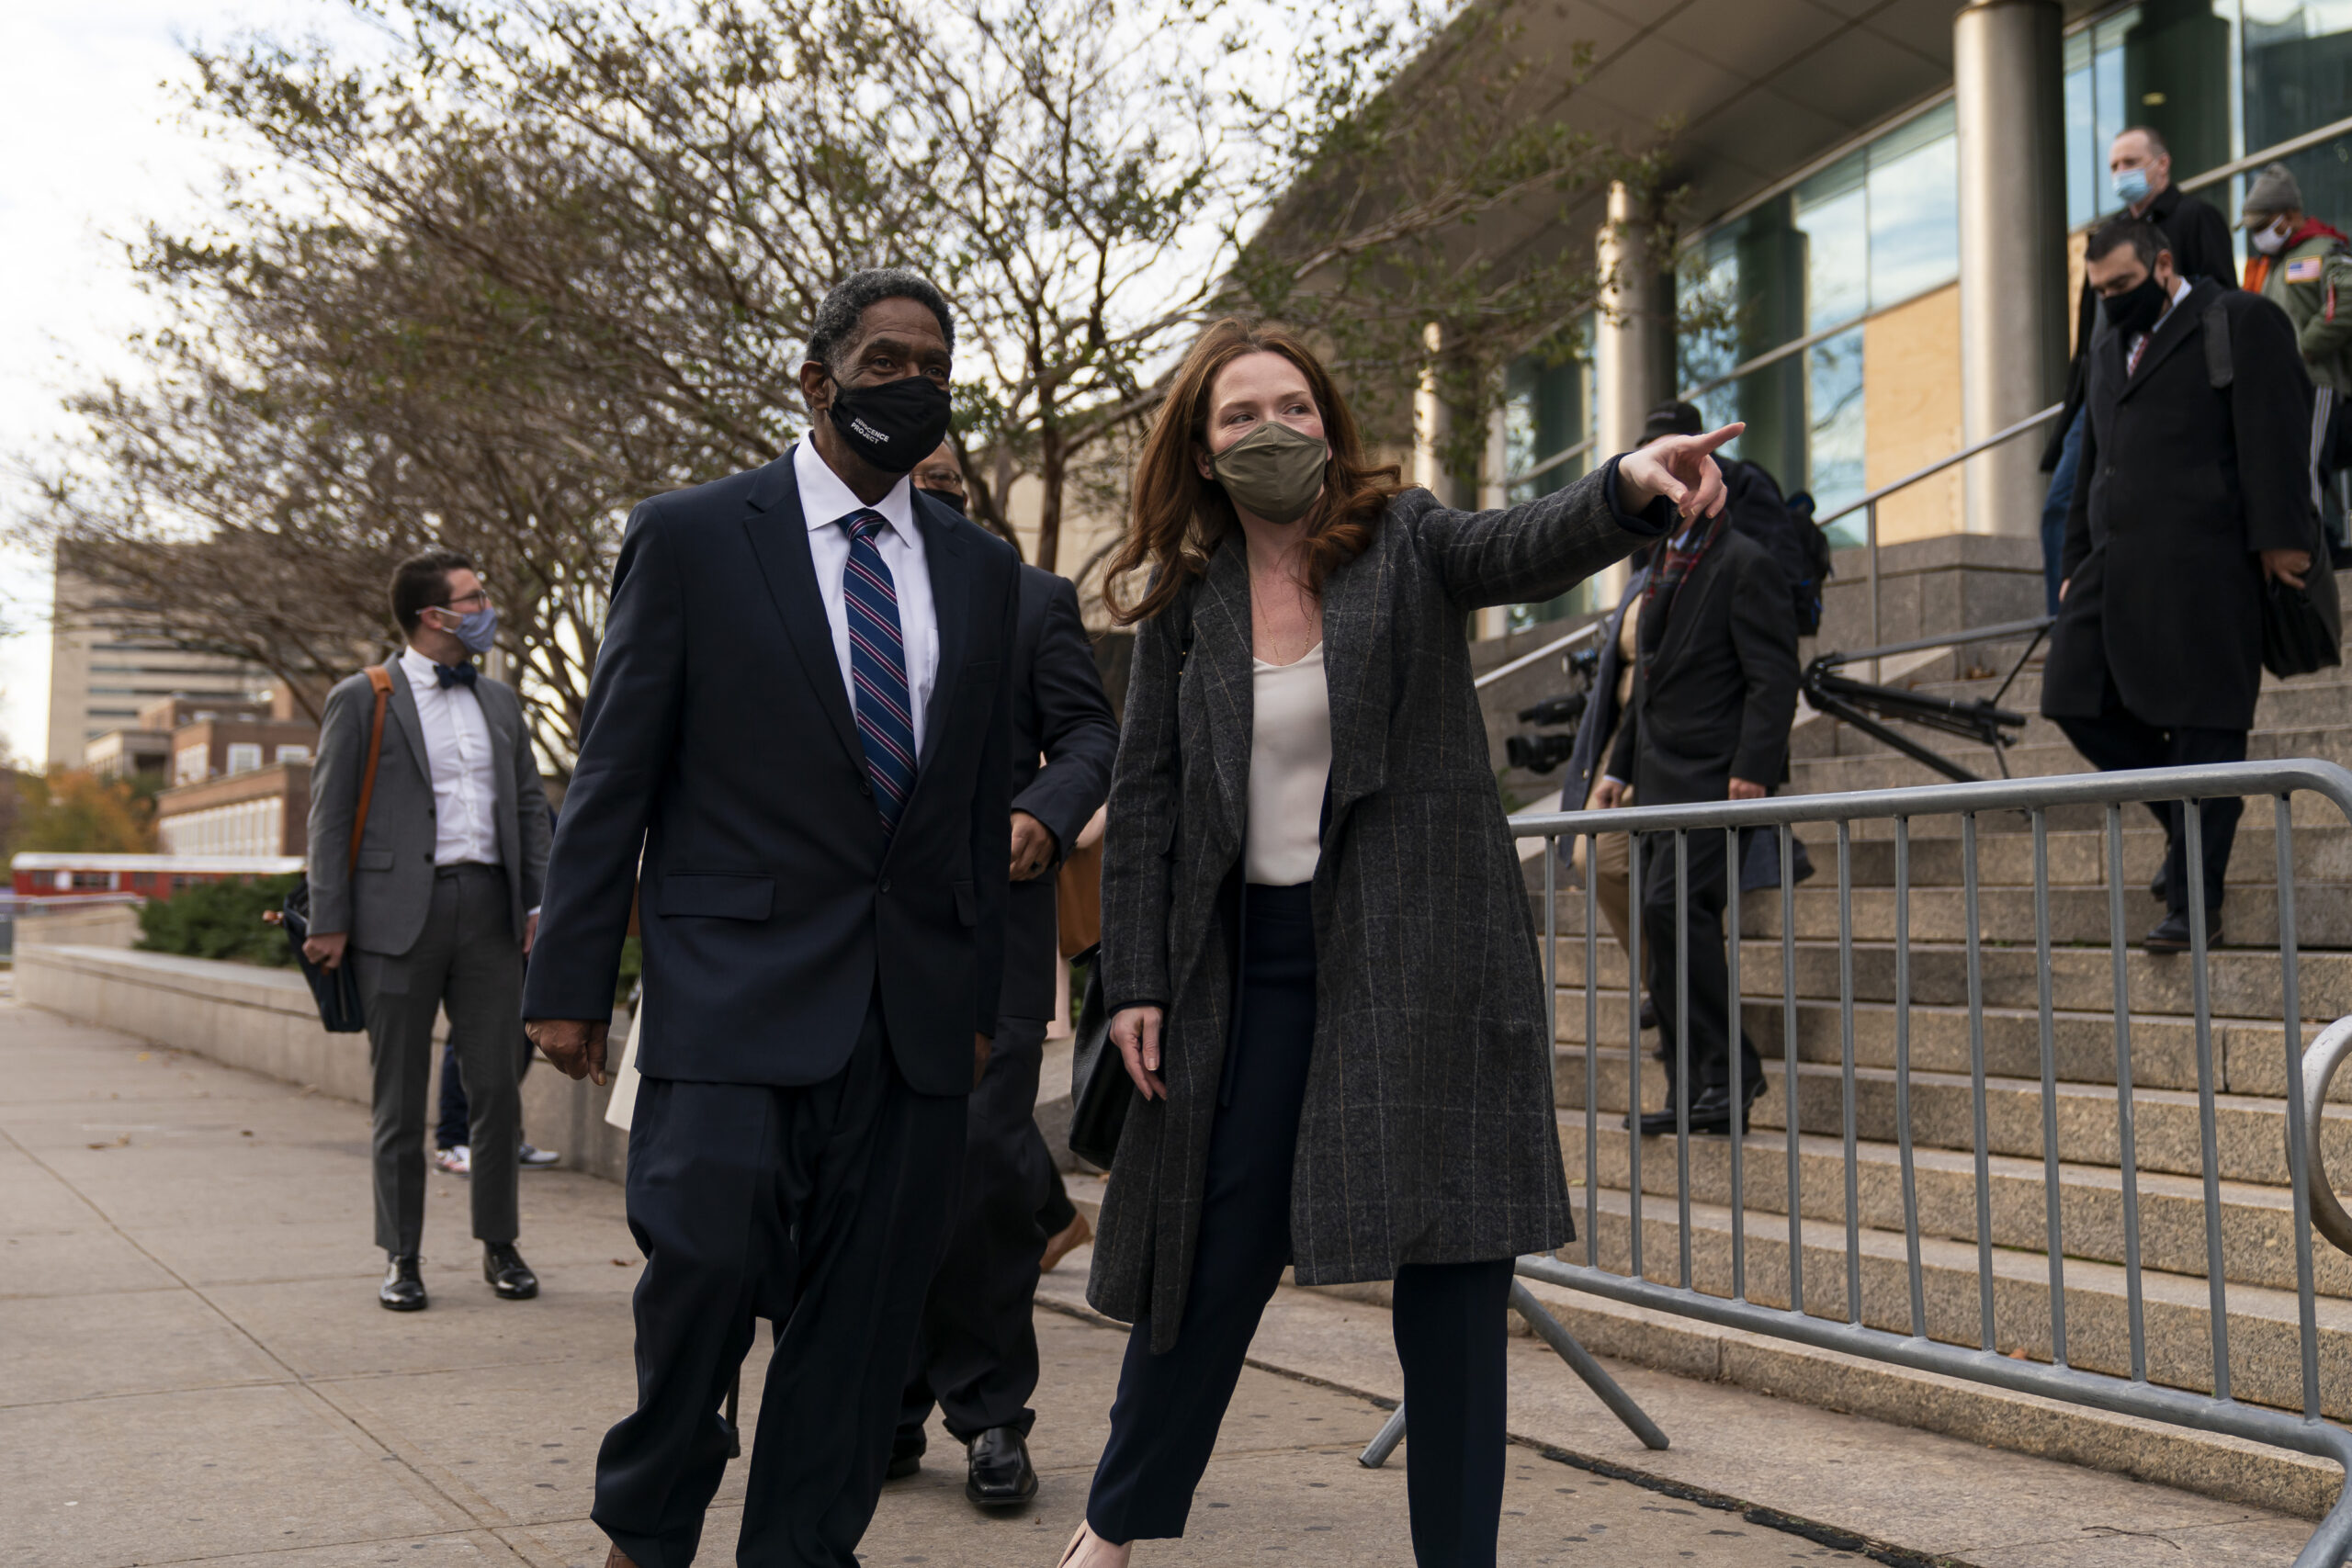 Innocence Project Senior Staff Attorney Susan Friedman with client Jaythan Kendrick after his exoneration on Nov. 19, 2020, in New York. (Image: Ben Hider/AP Images for Innocence Project)